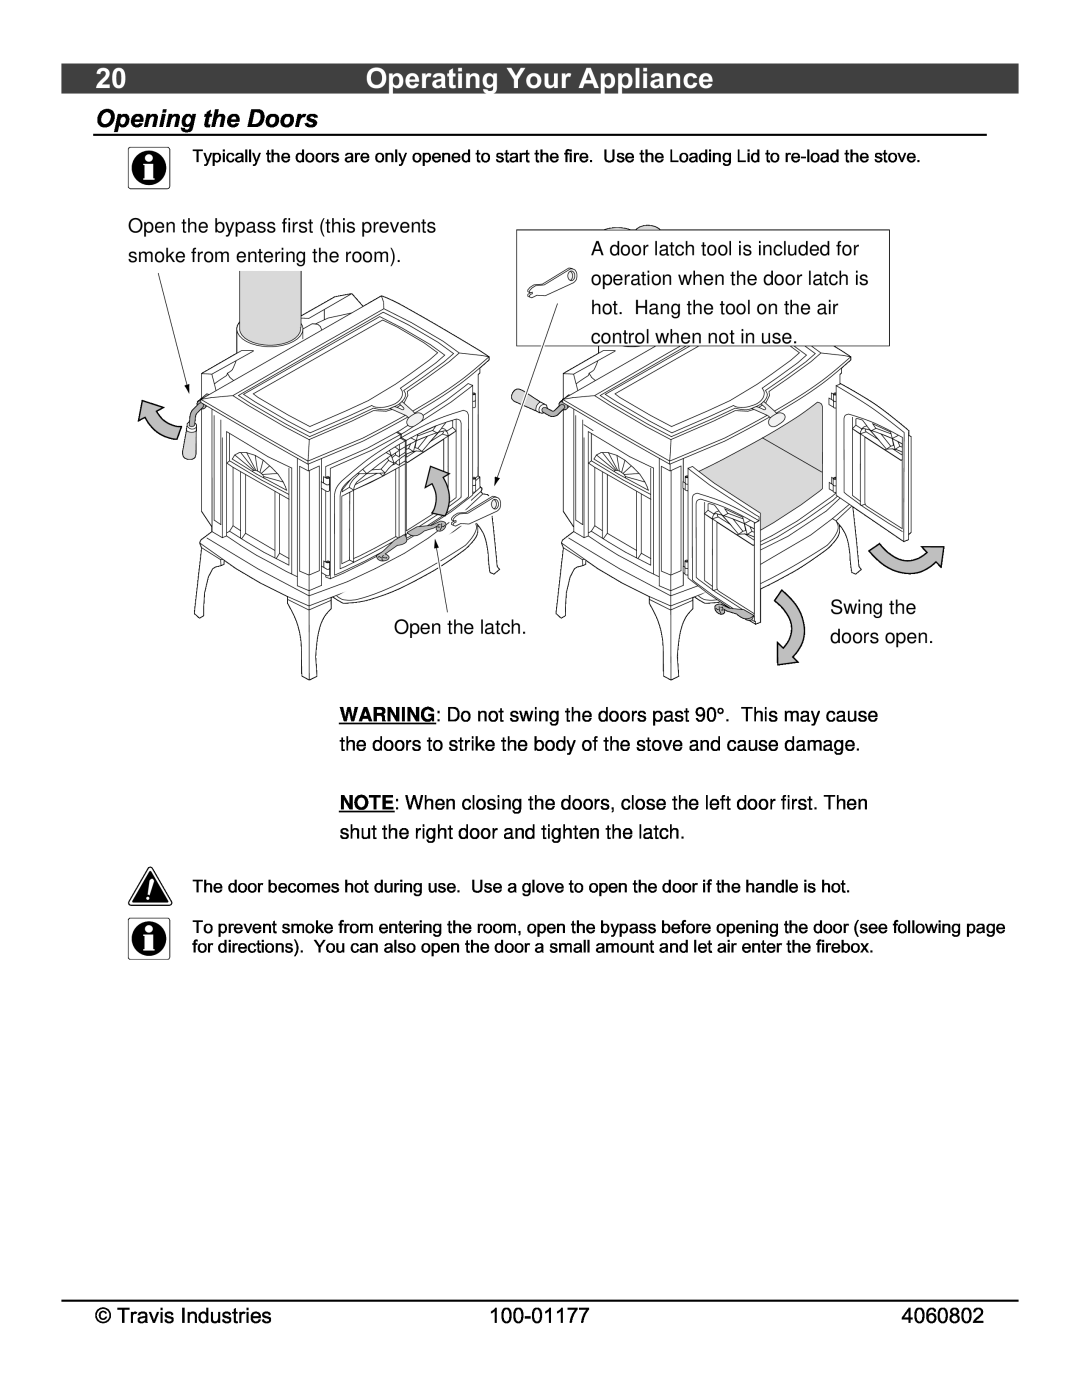 Lopi Stove owner manual Operating Your Appliance, Opening the Doors 